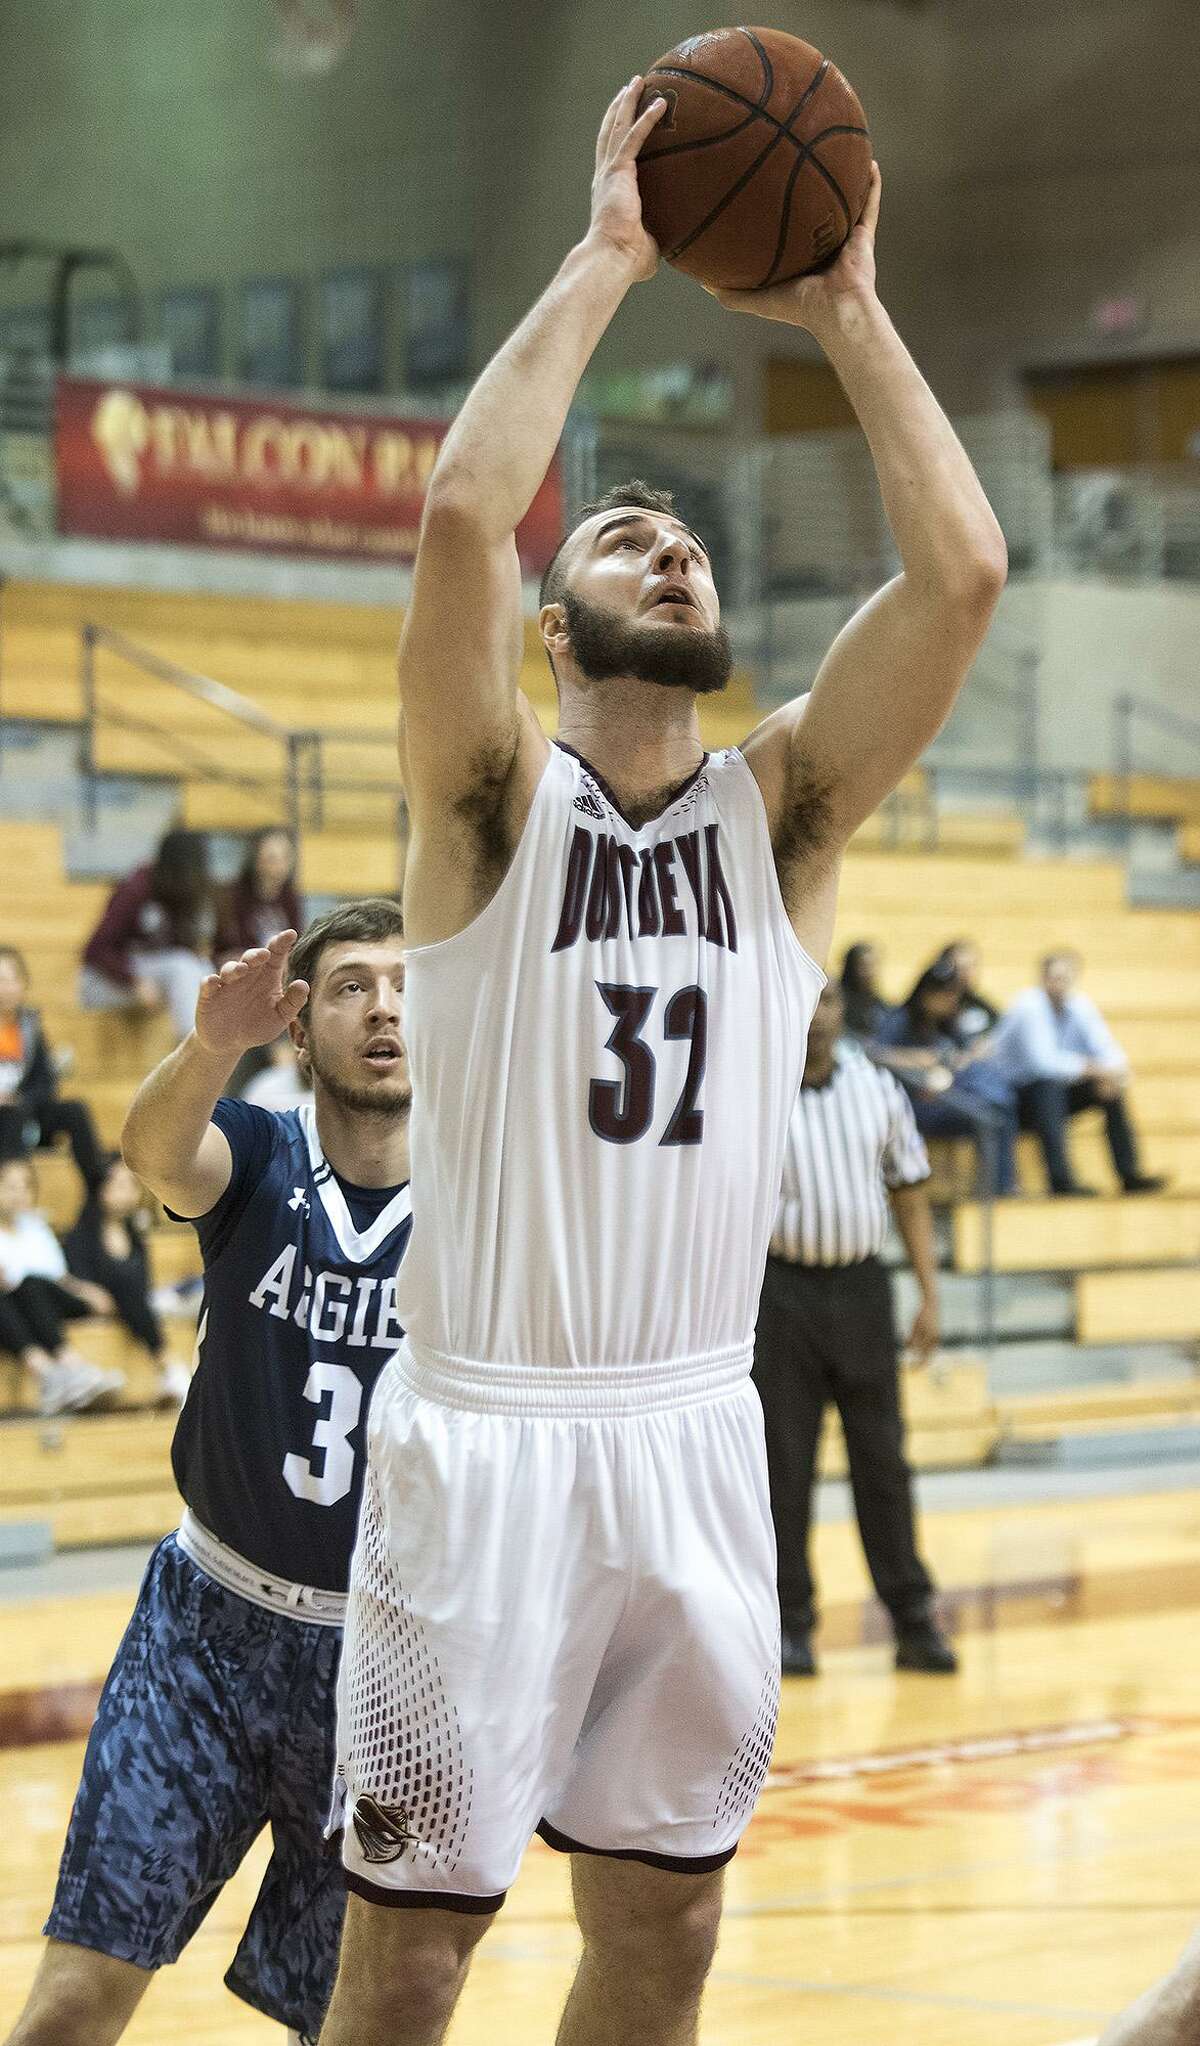 Jordan VanDeKop had 18 points, seven rebounds and four assists as TAMIU won 90-81 at Oklahoma Panhandle State Thursday to pull into a four-way tie for first place.